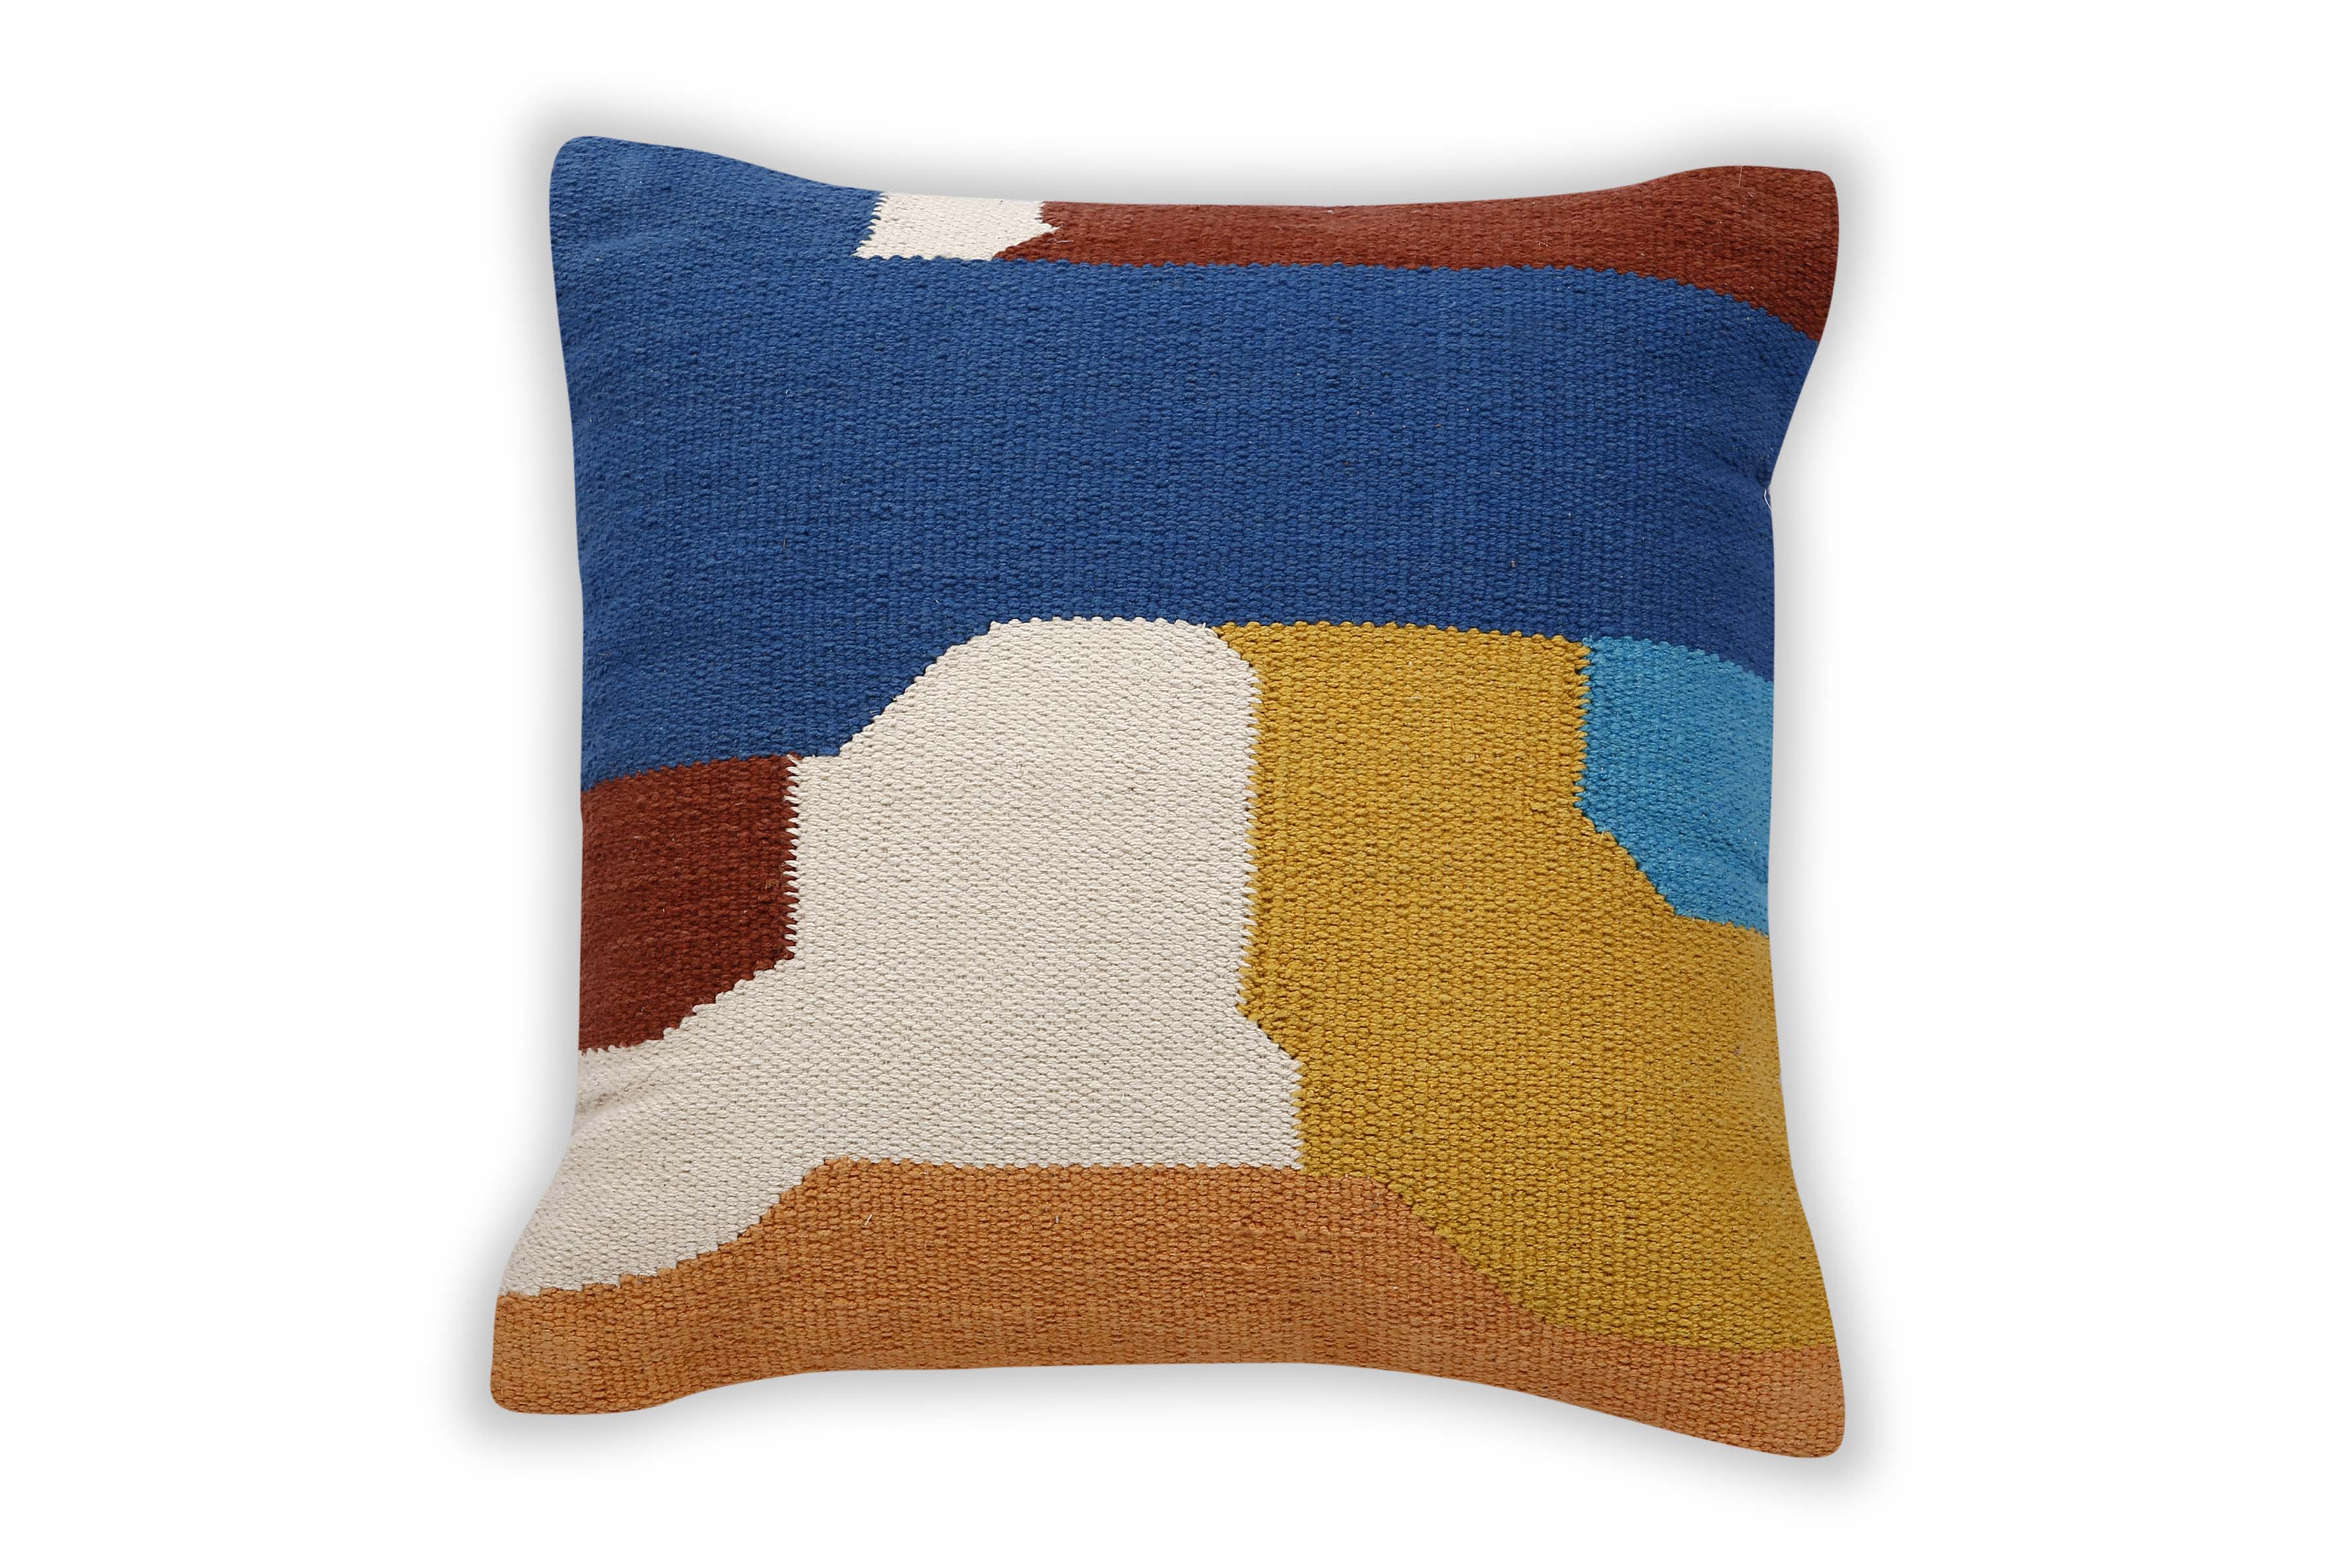 Ladakh Handcrafted Throw Pillow, Multi- 18x18 inch